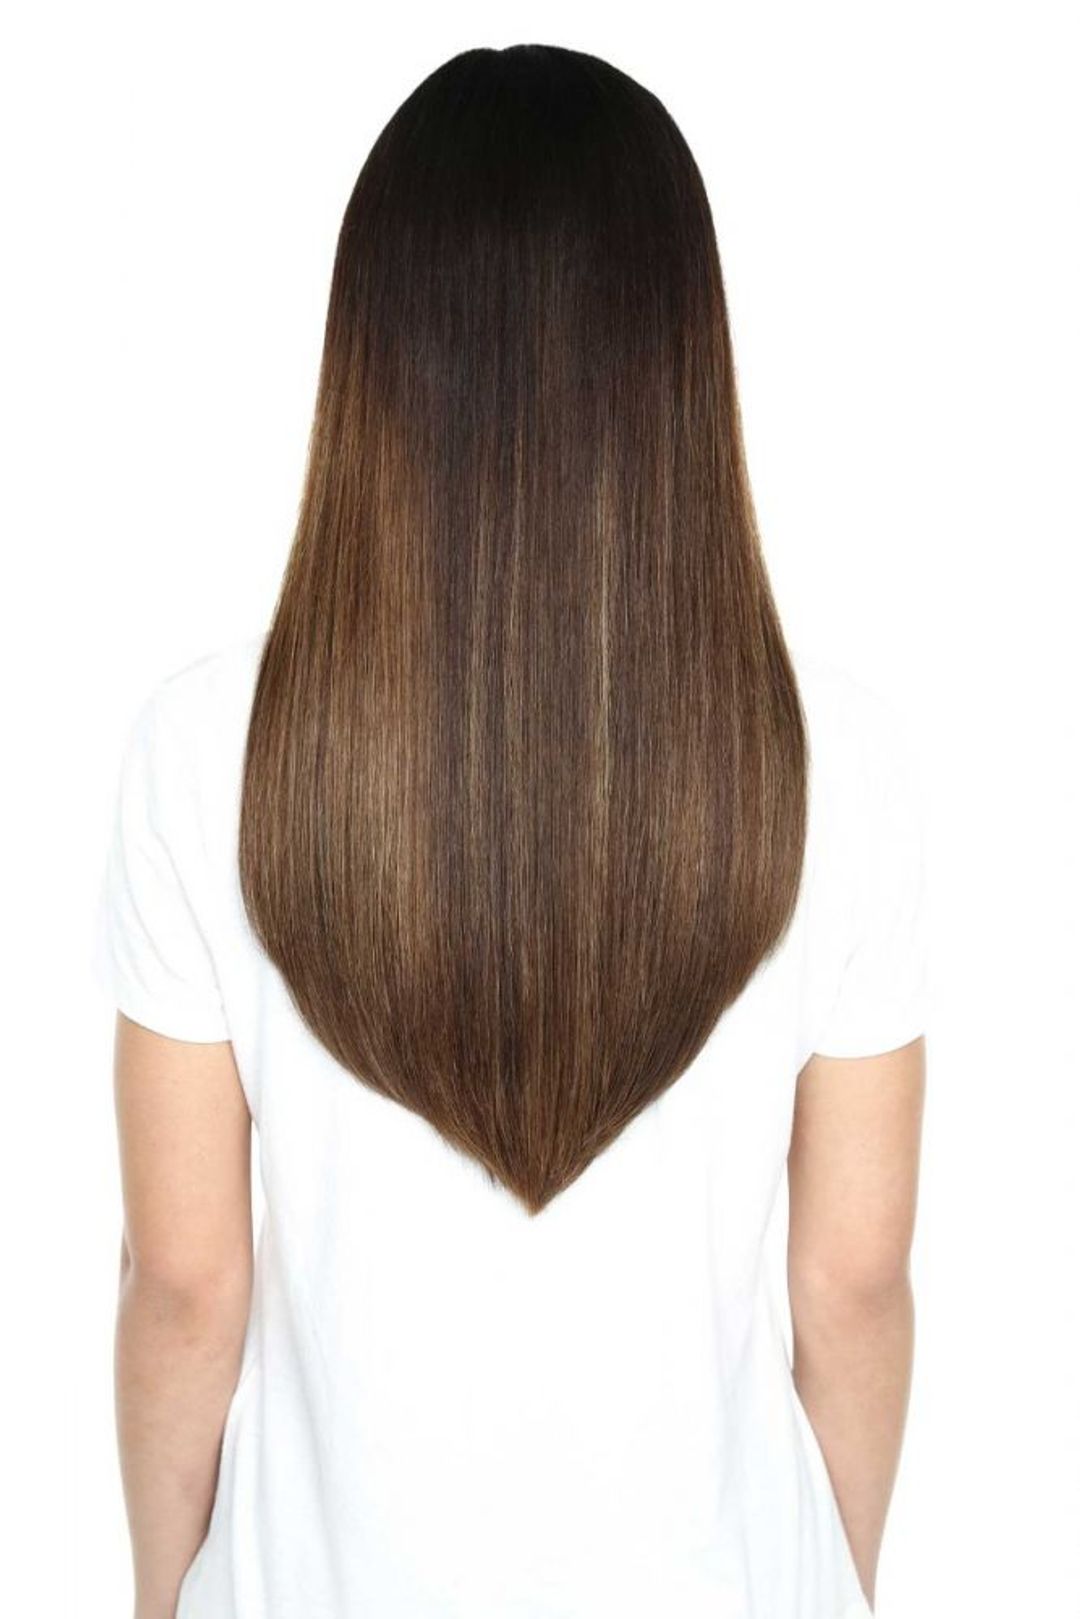 Beauty Works Gold Double Weft Extensions - Ashed Brown,18"